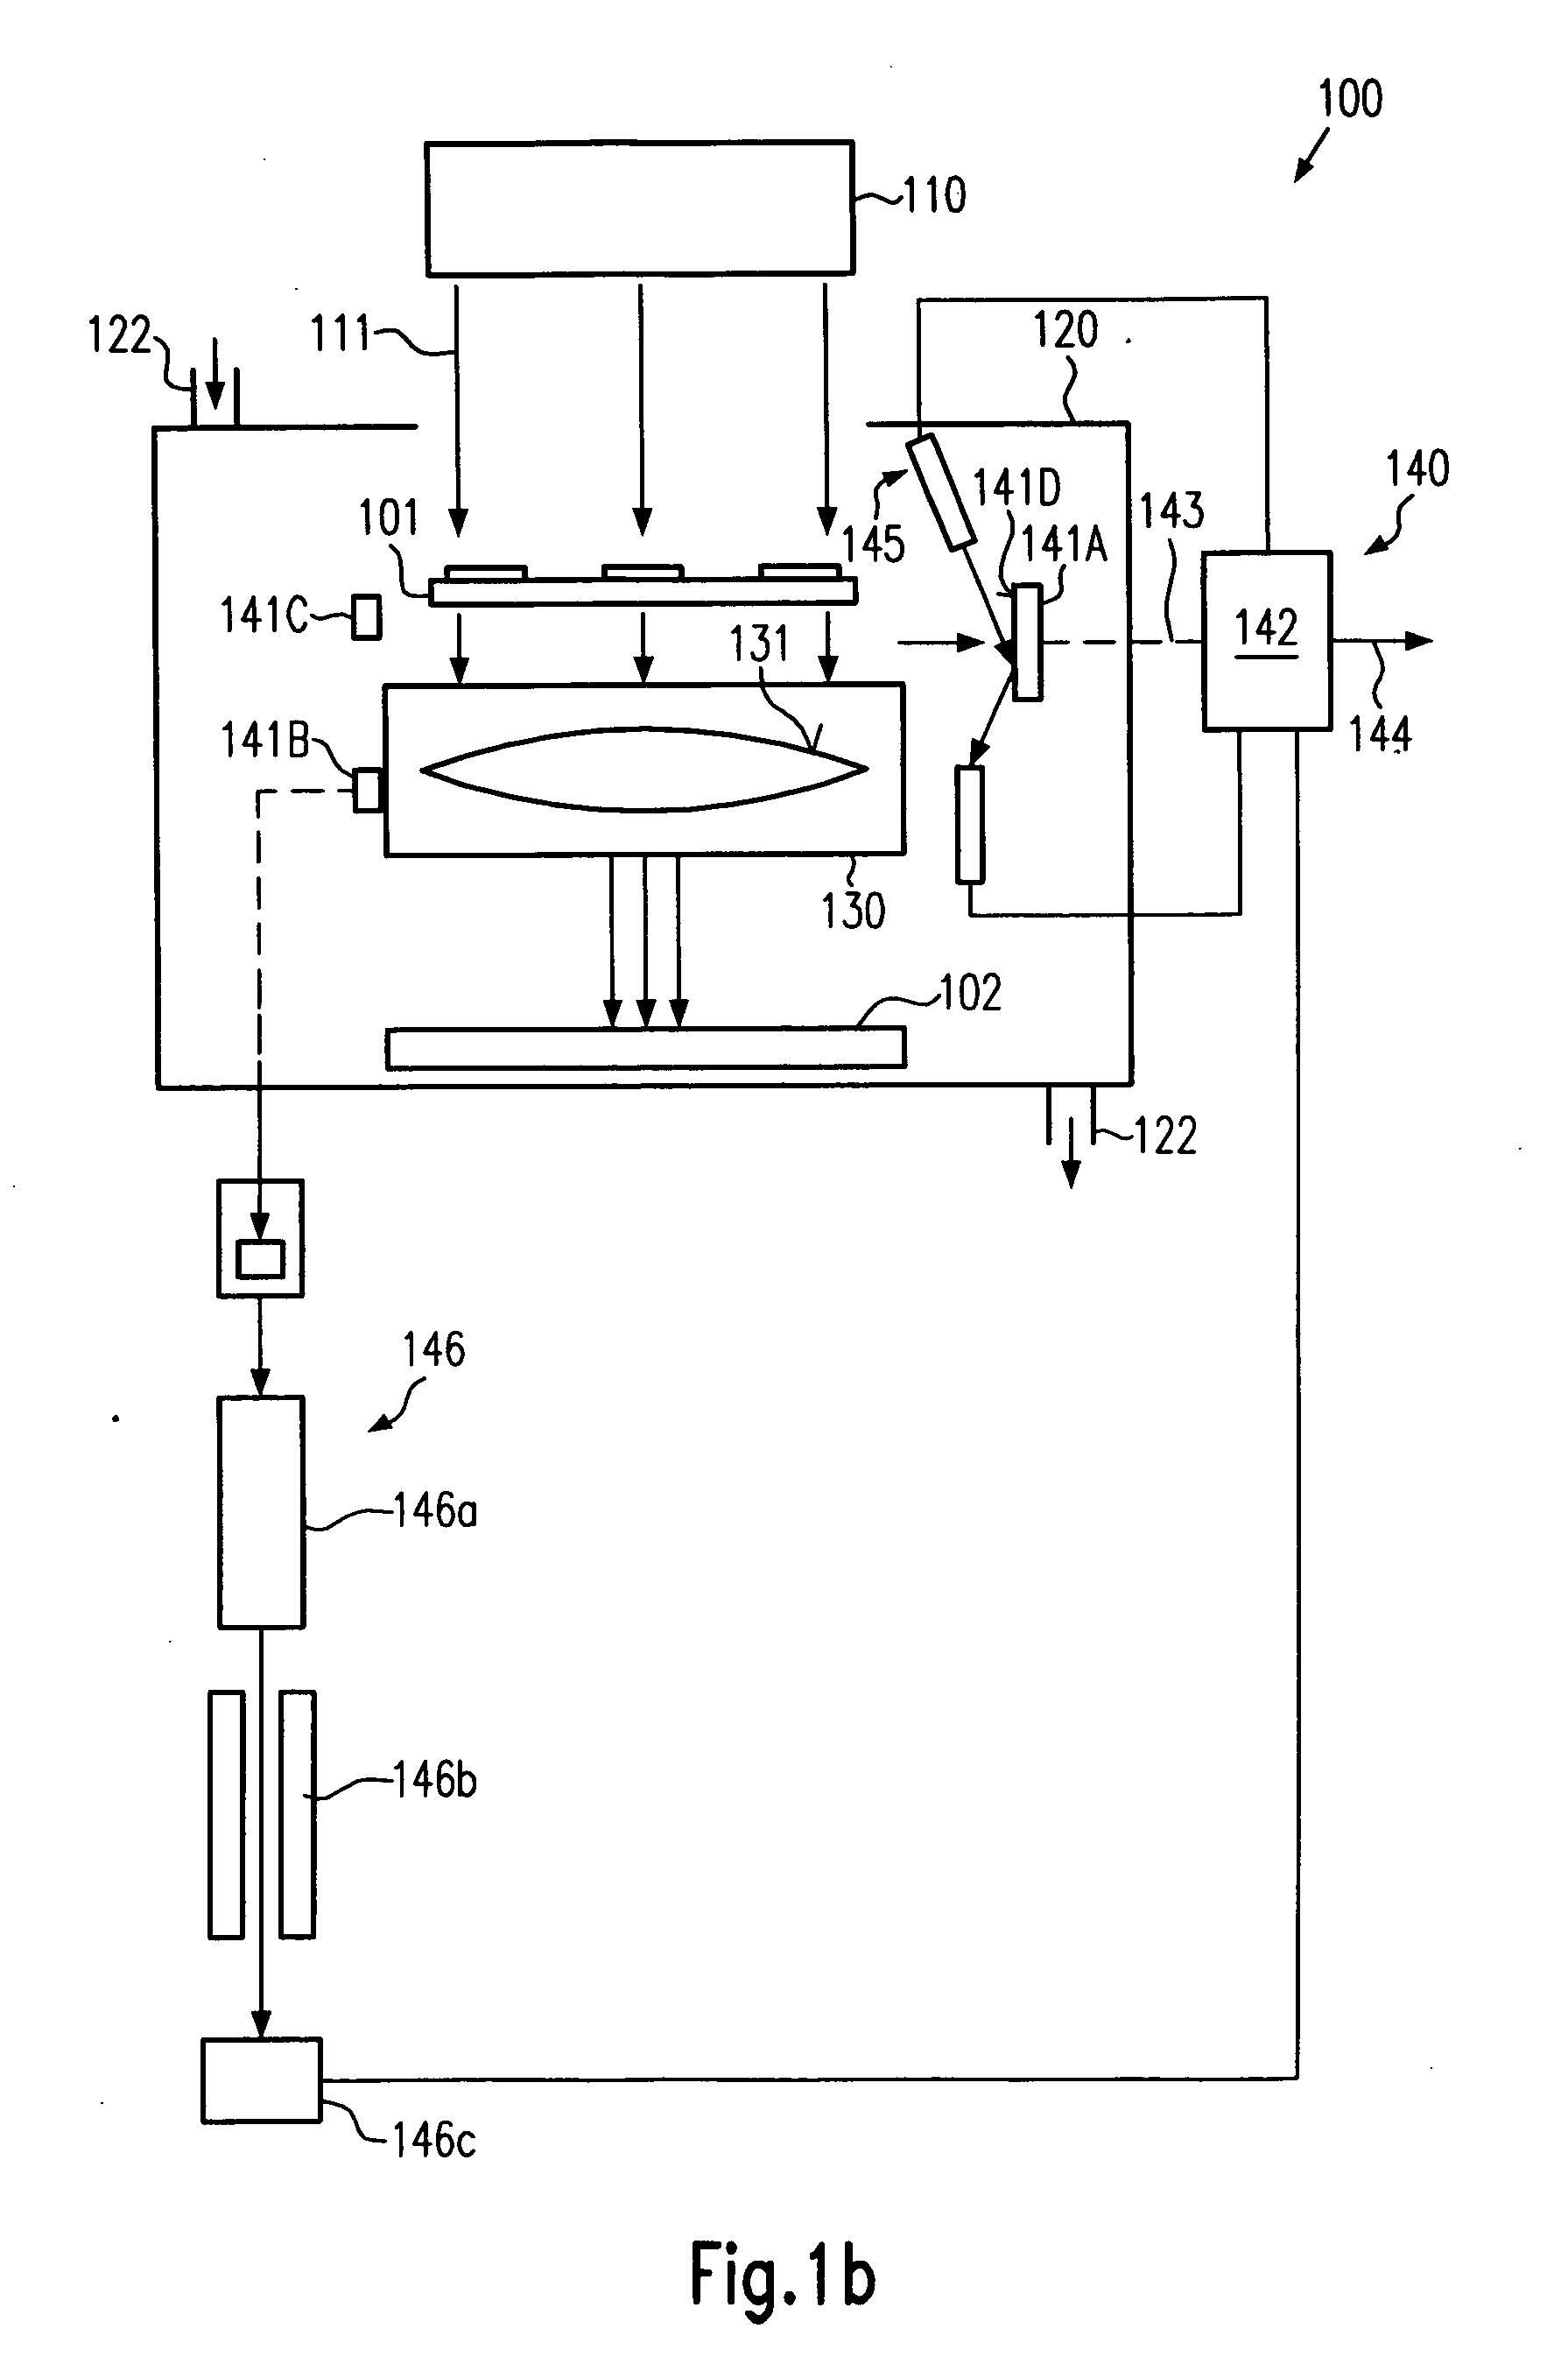 Method and system for contamination detection and monitoring a lithographic exposure tool and operating method for the same under controlled atmospheric conditions